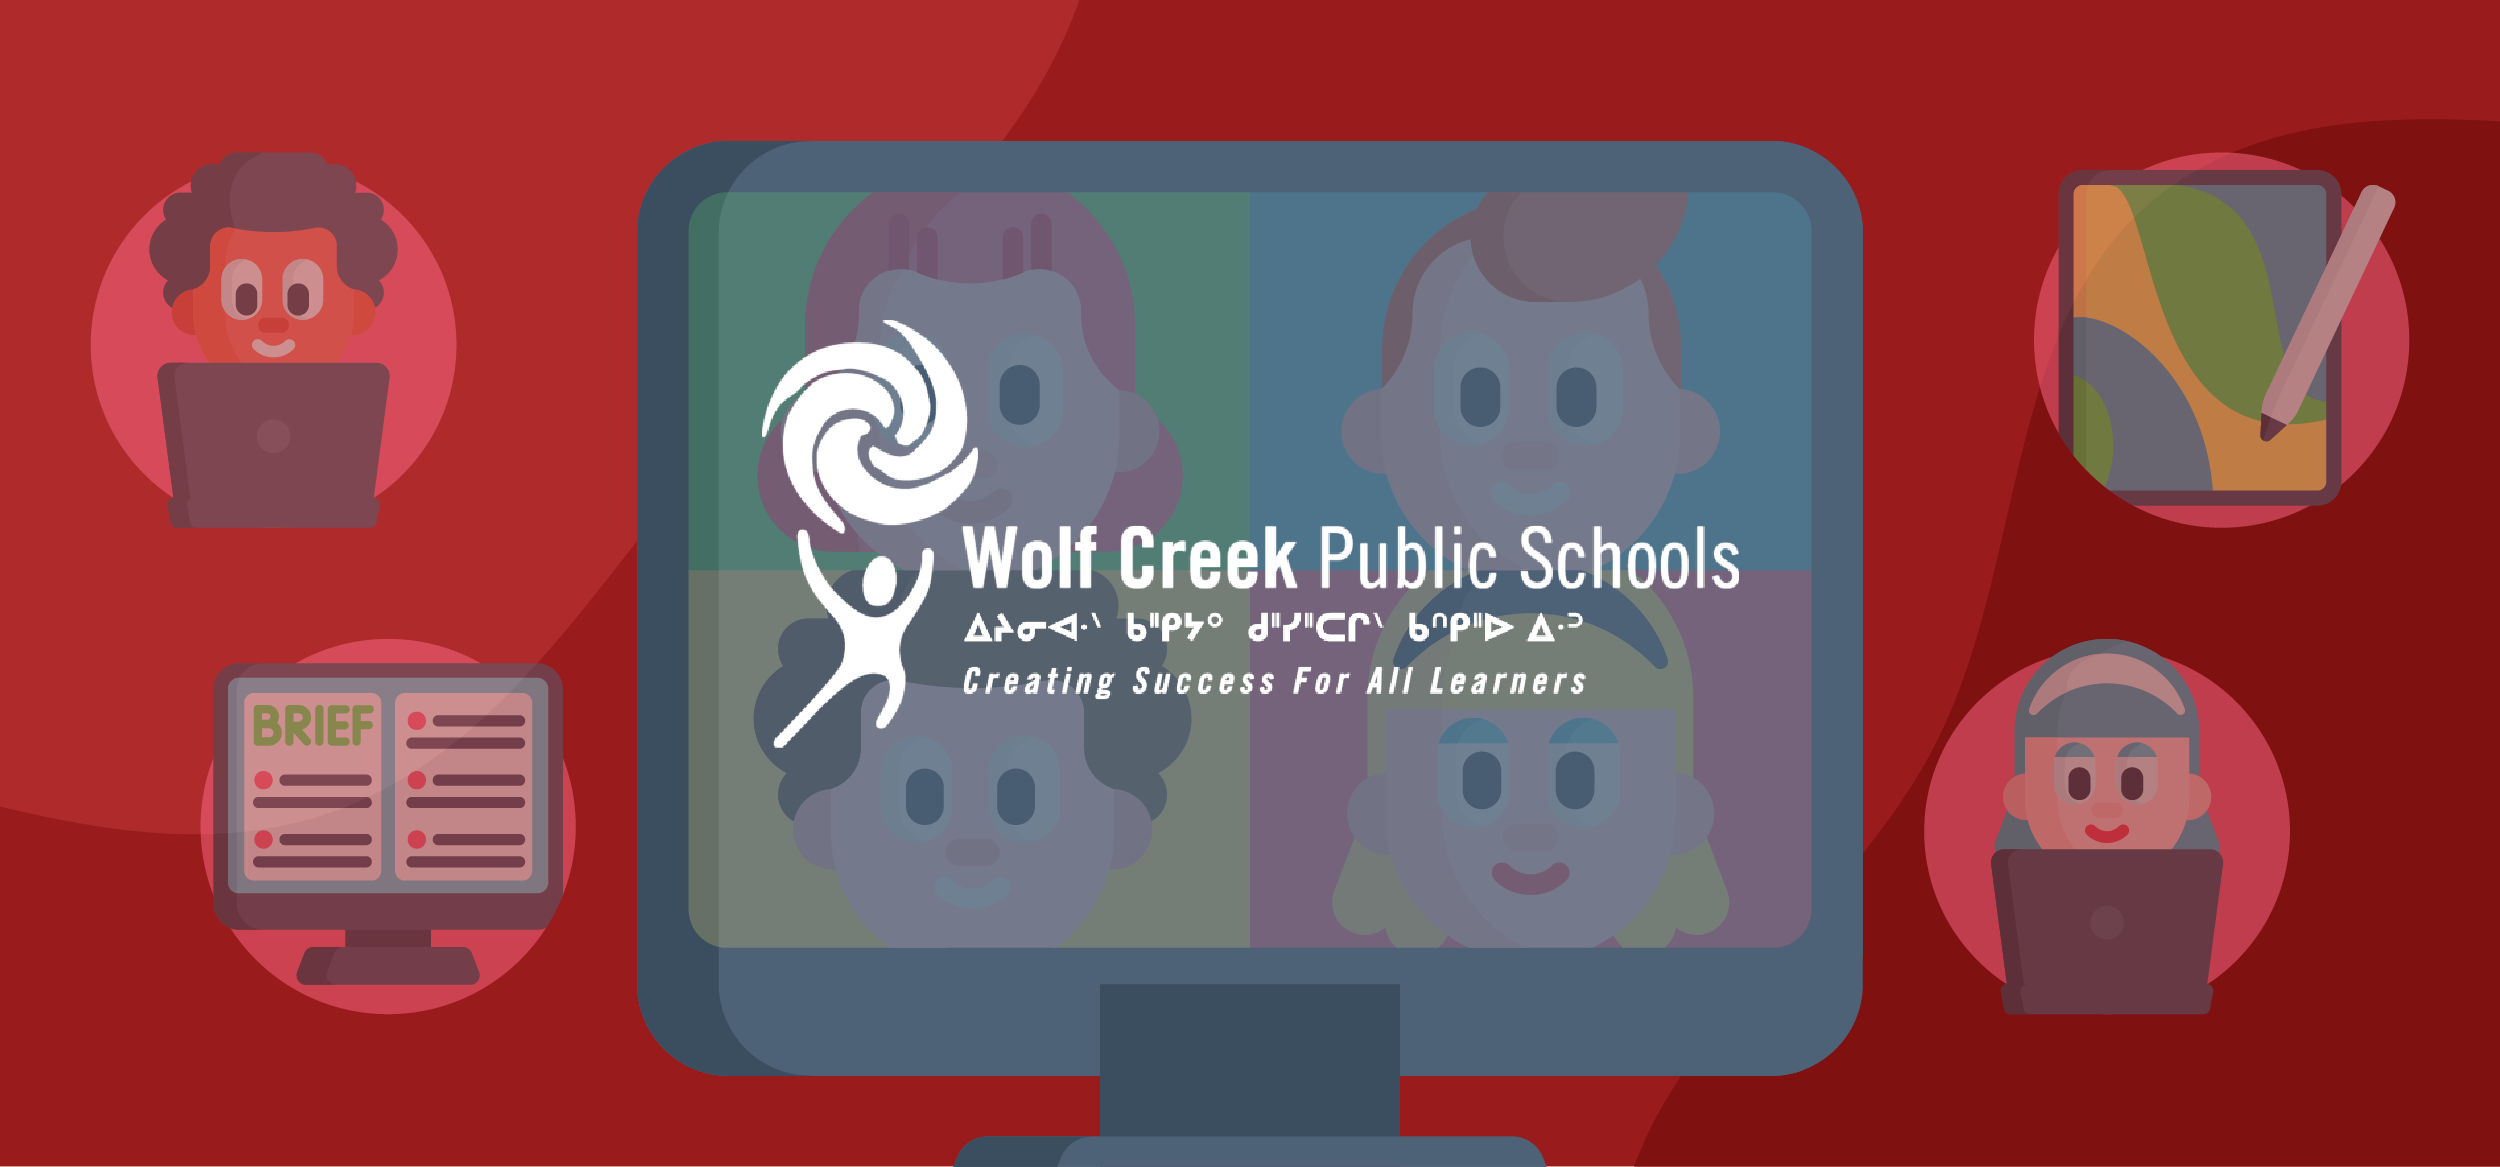 Addressing the needs of all learners at Wolf Creek Public Schools